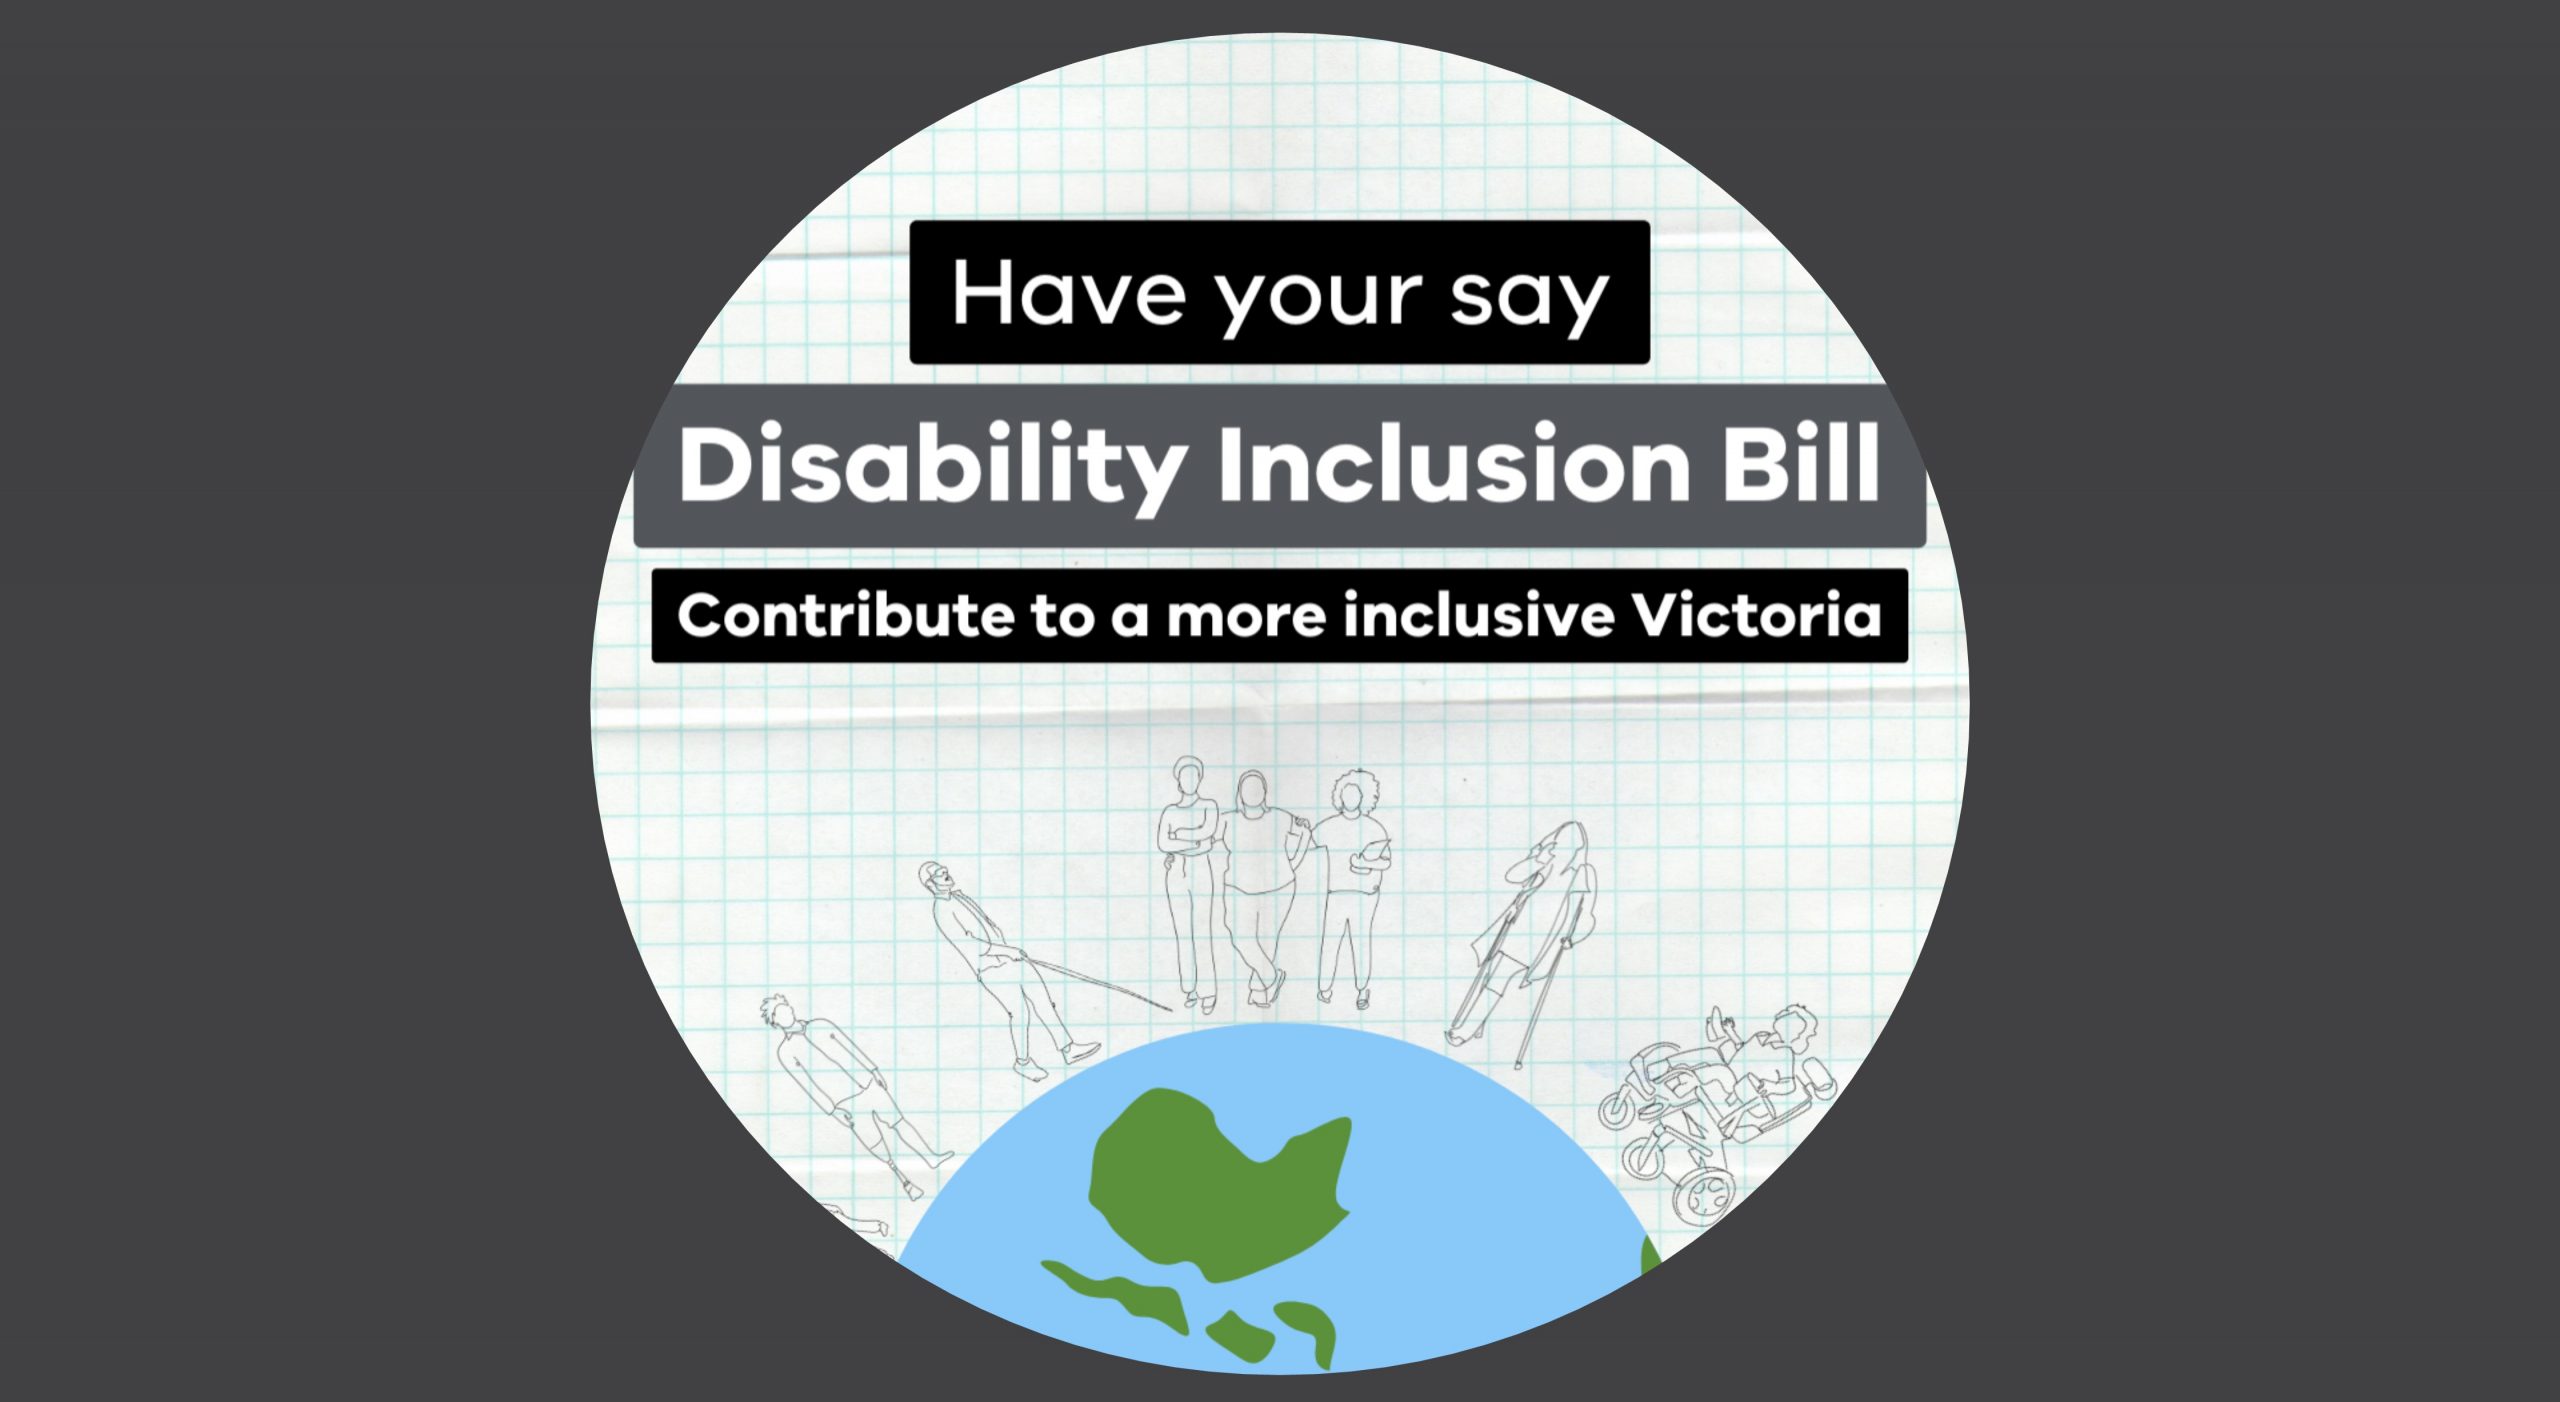 Image with words - Have your say - Disability Inclusion Bill 